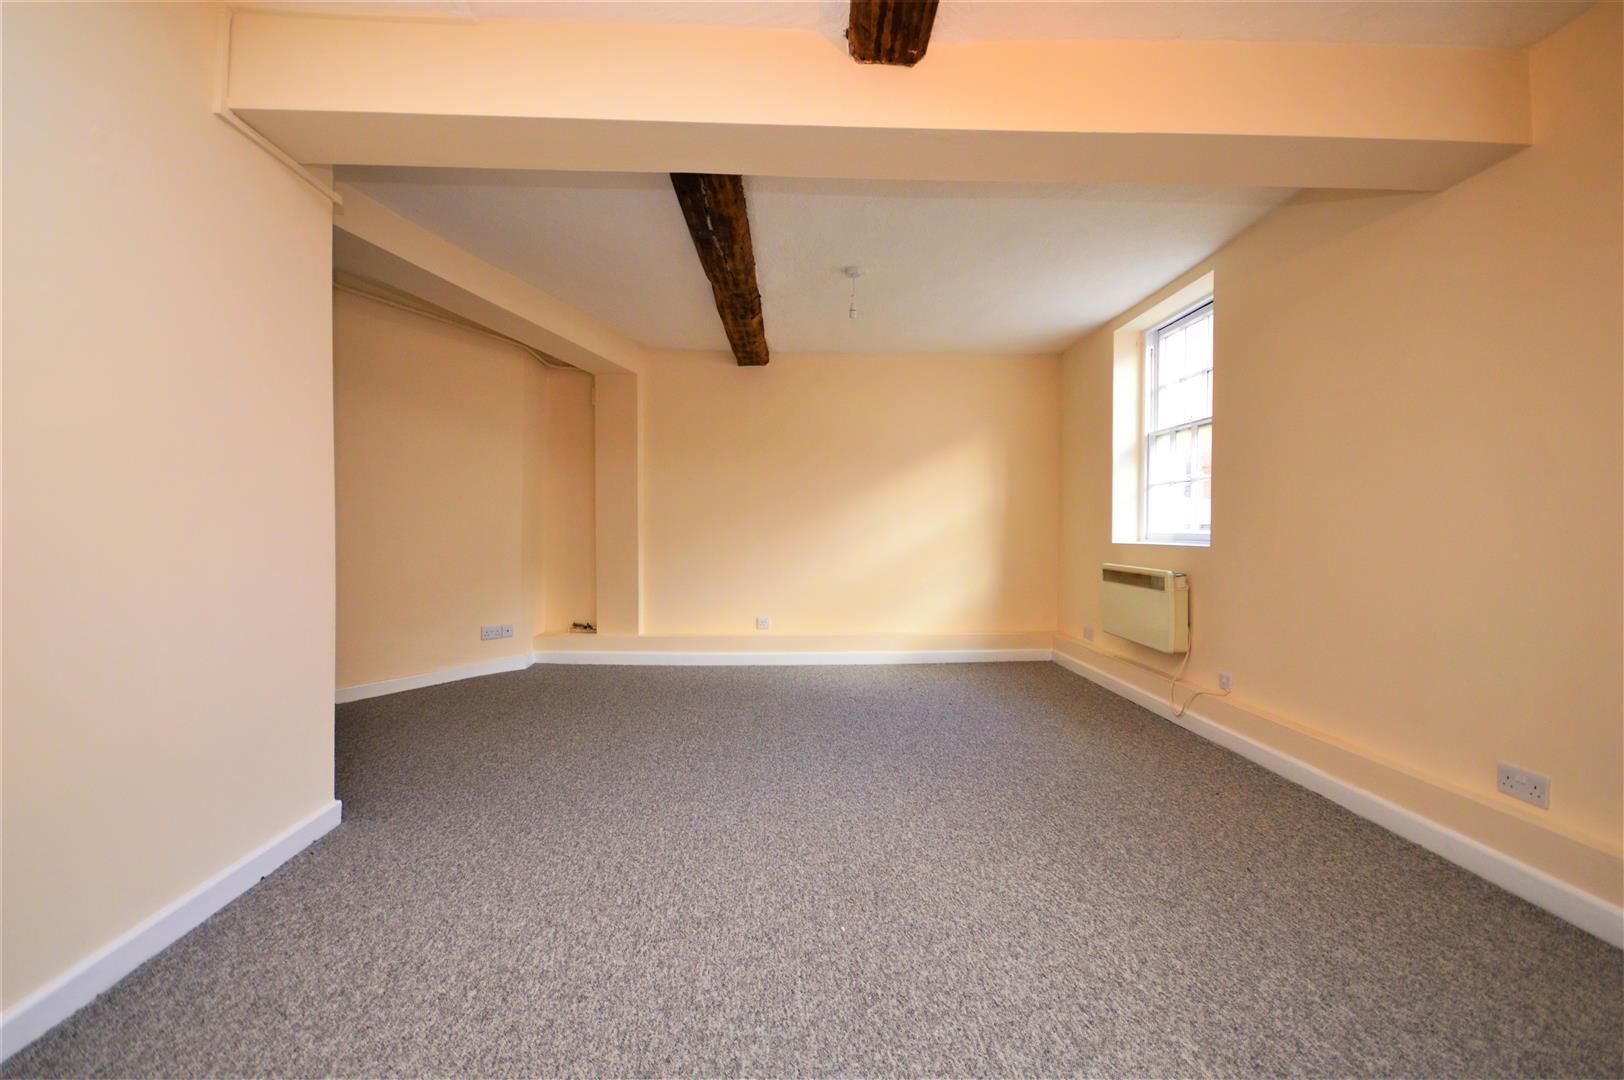 2 bed  for sale in Hereford 10